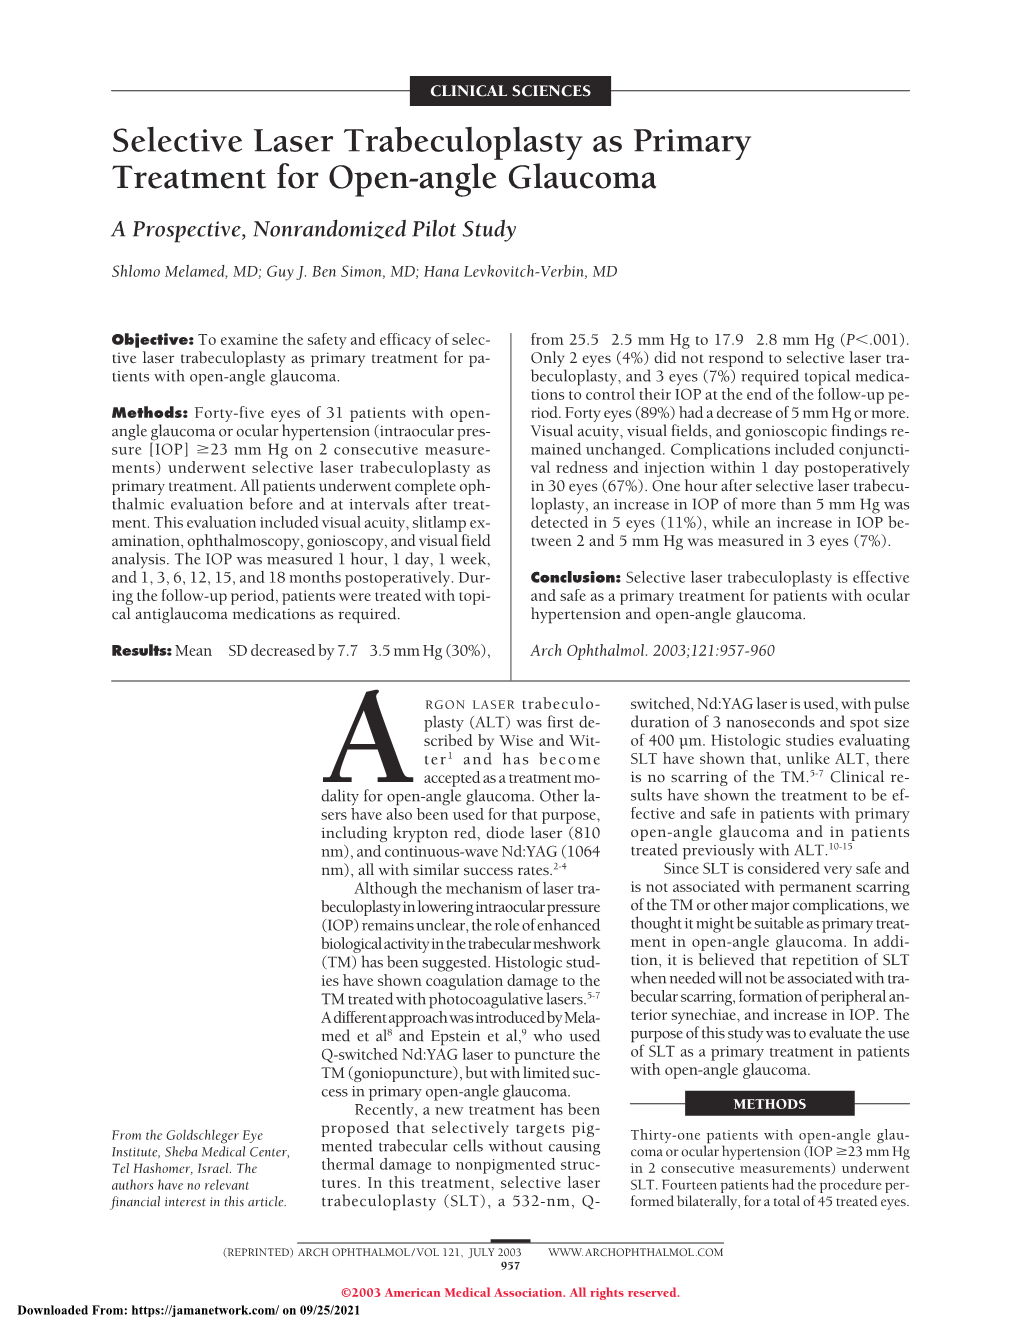 Selective Laser Trabeculoplasty As Primary Treatment for Open-Angle Glaucoma a Prospective, Nonrandomized Pilot Study